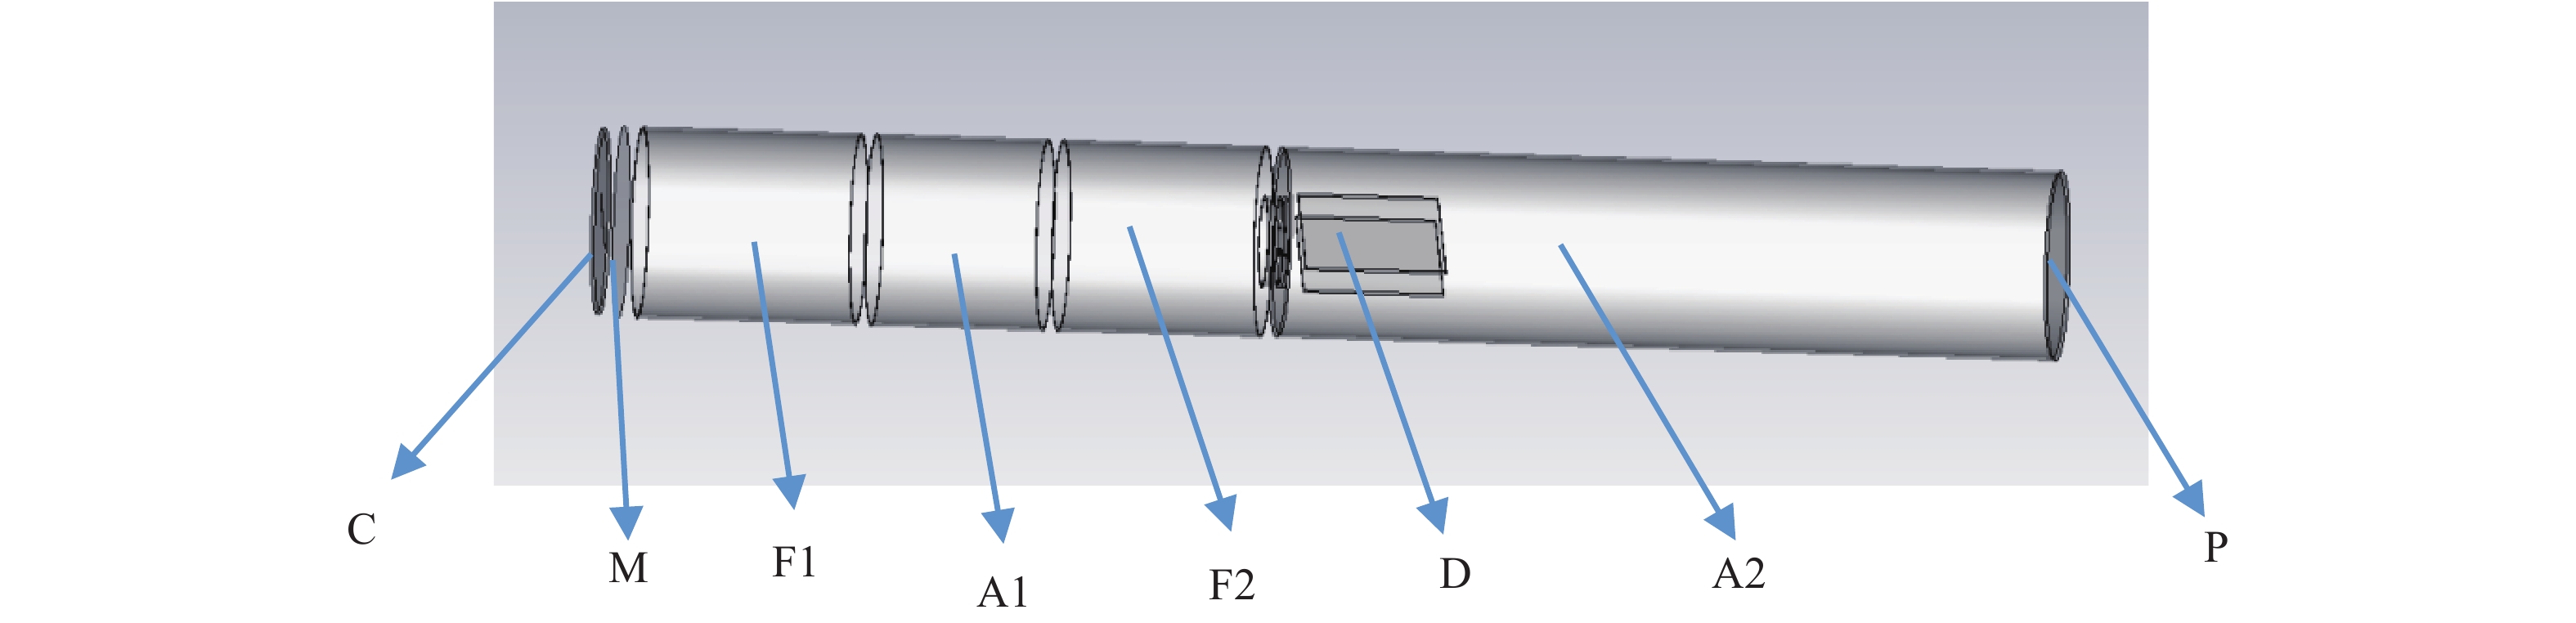 Structure of the streak image tube with six electrodes